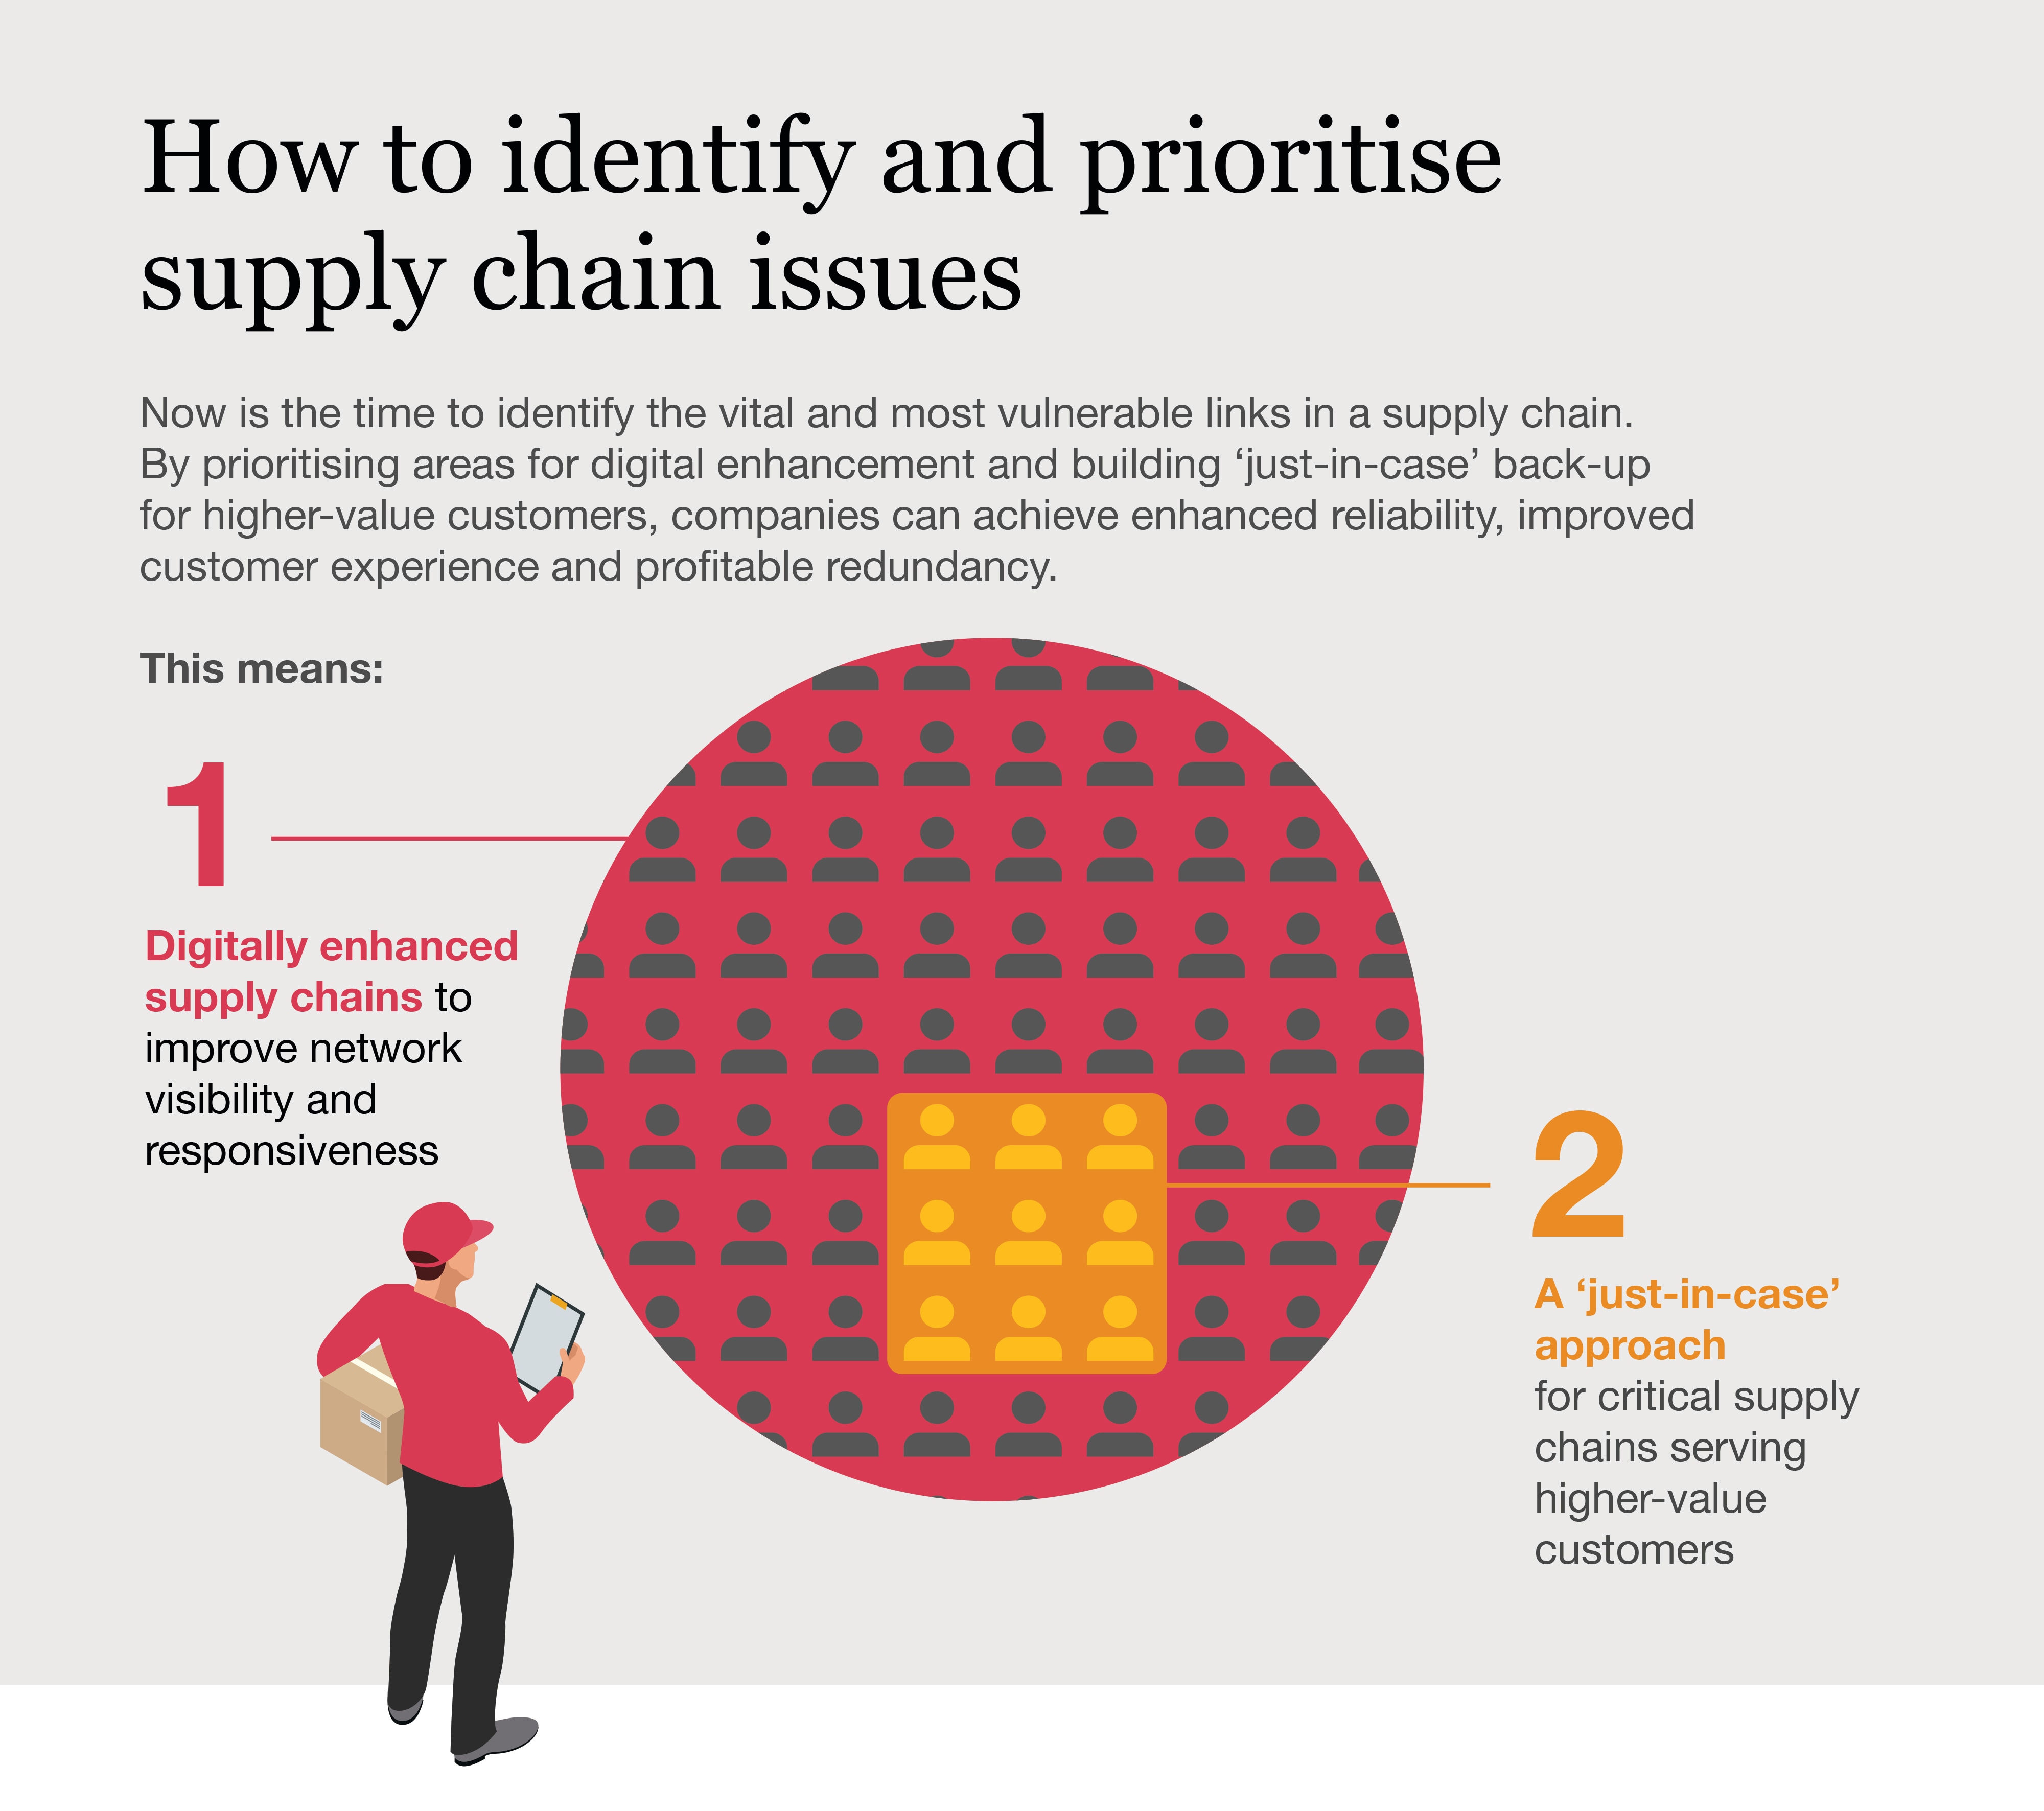 Balancing just-in-time with just-in-case: Profitable redundancy in supply chains PwC Asia Pacific